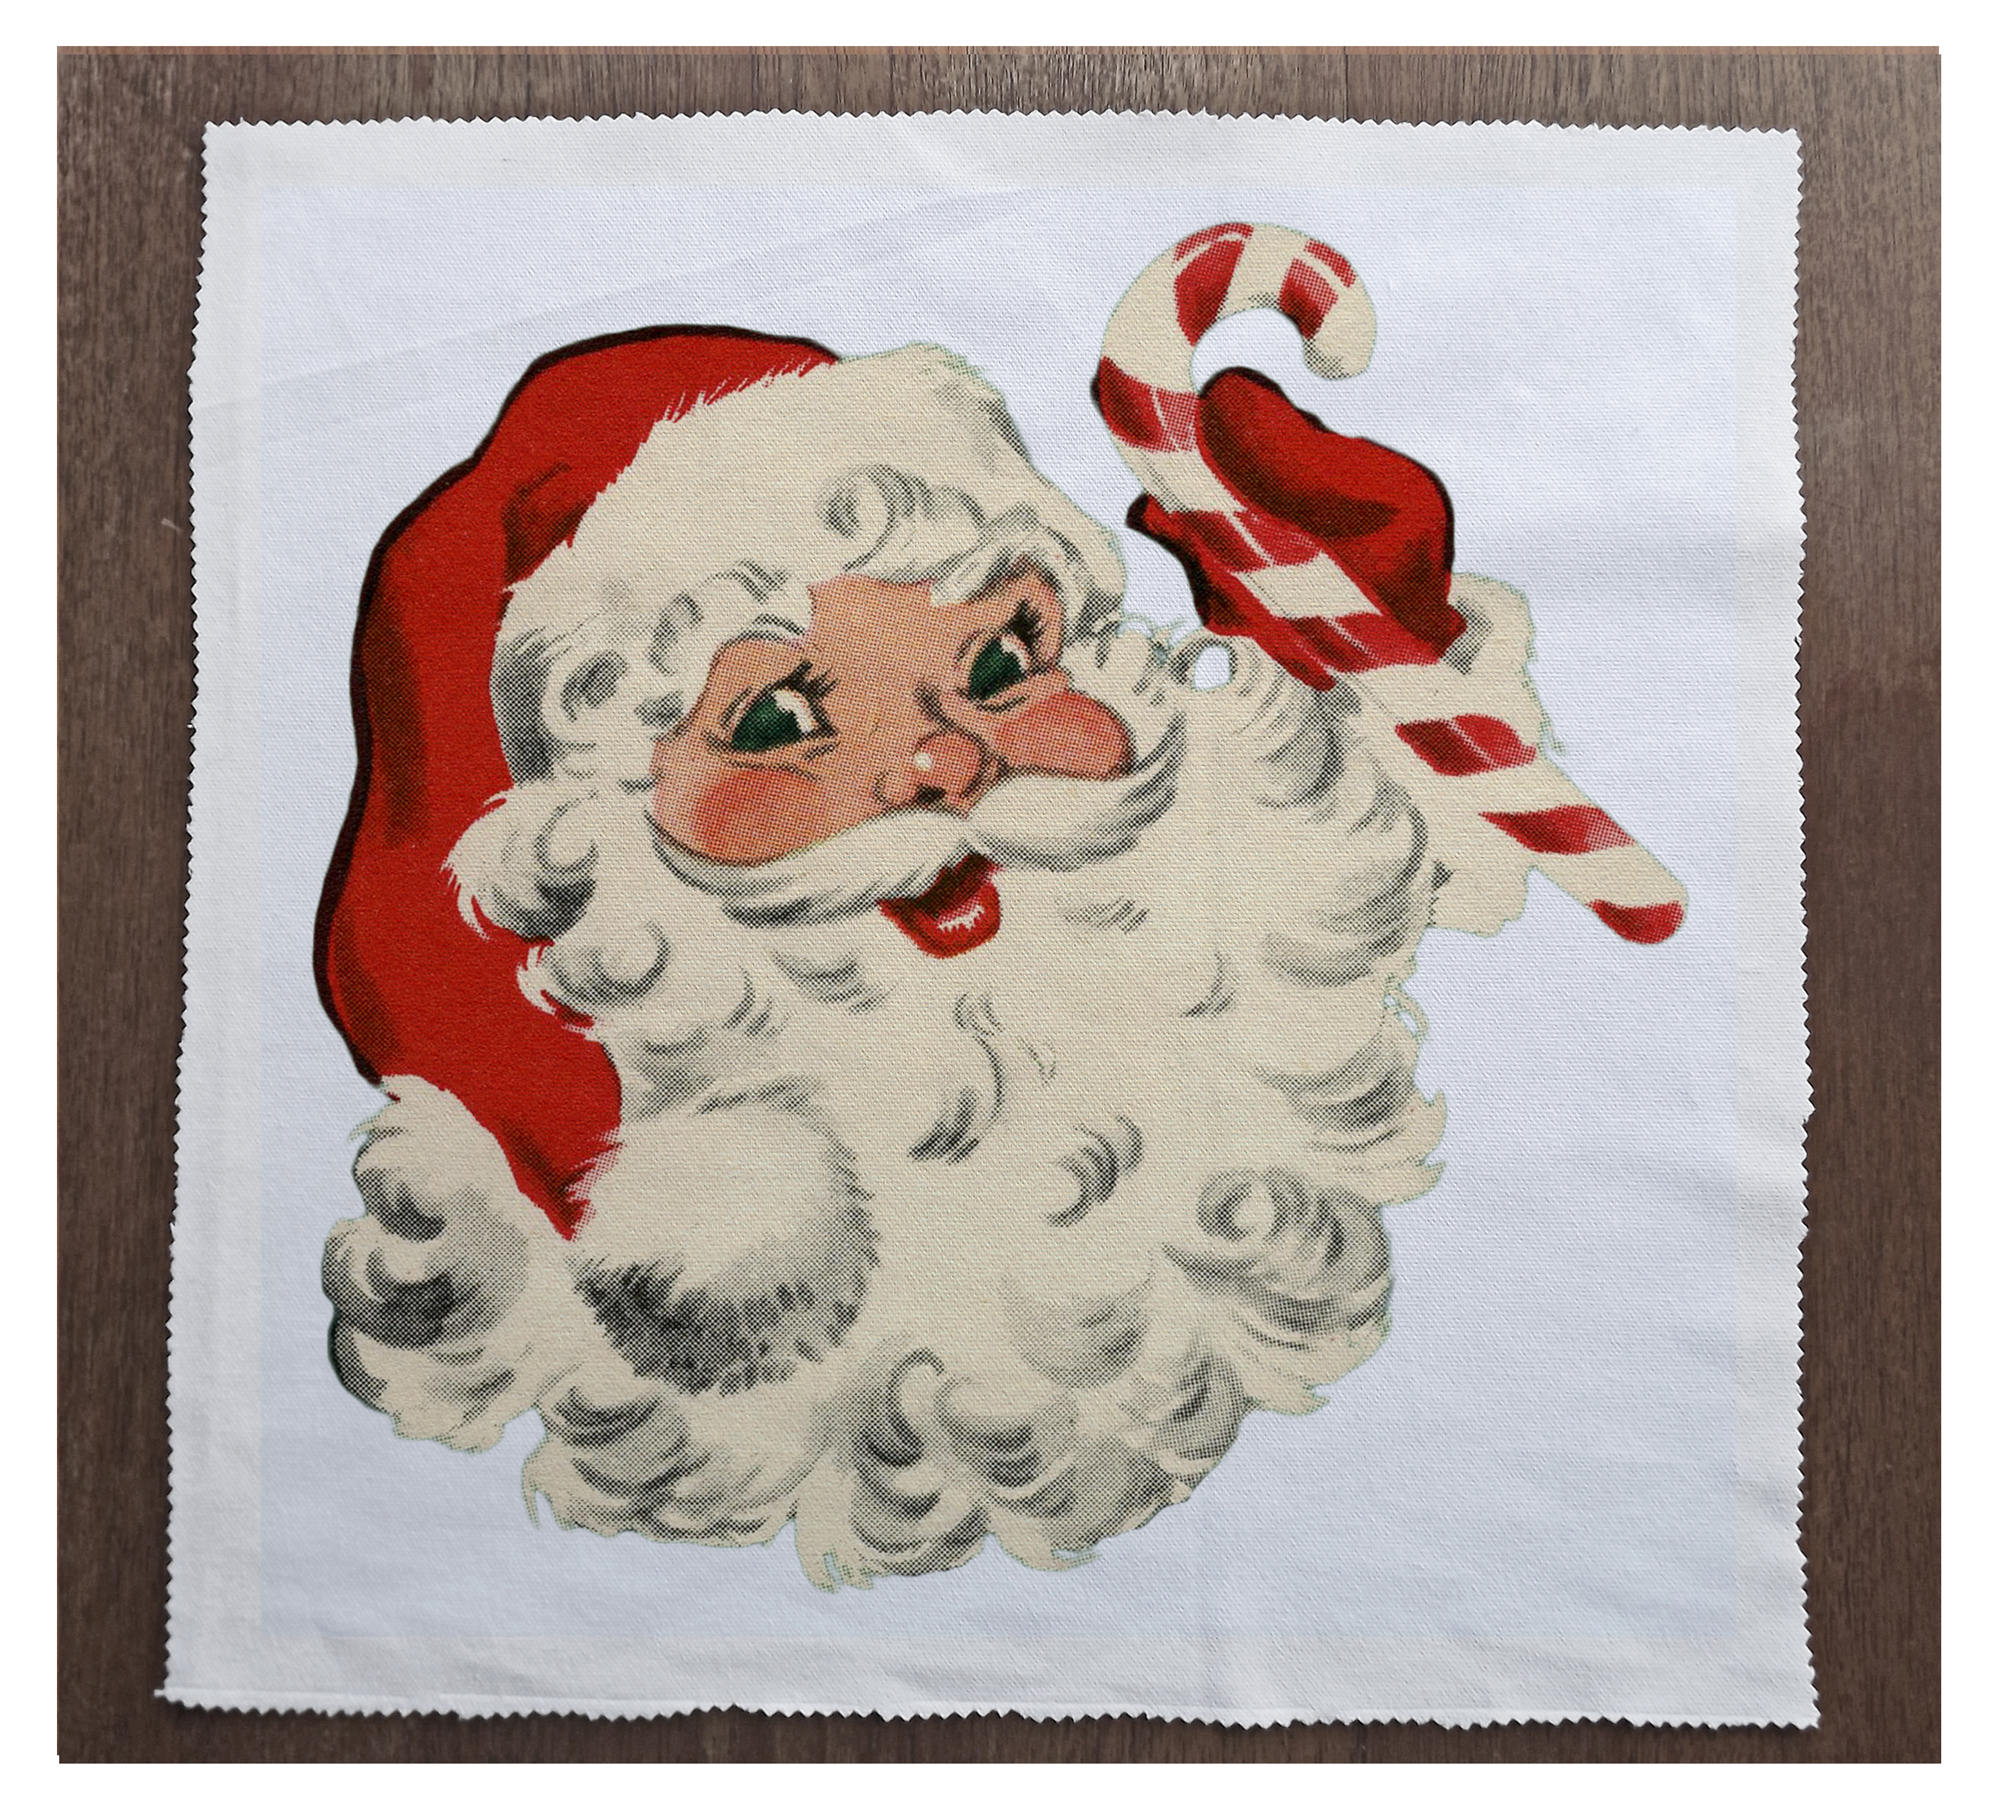 Country Santa Claus Christmas Fabric Panels to Sew, 4 13 X 13 Ready to Sew  Pillows, Wallhangings, Quilts, Clothing Etc 